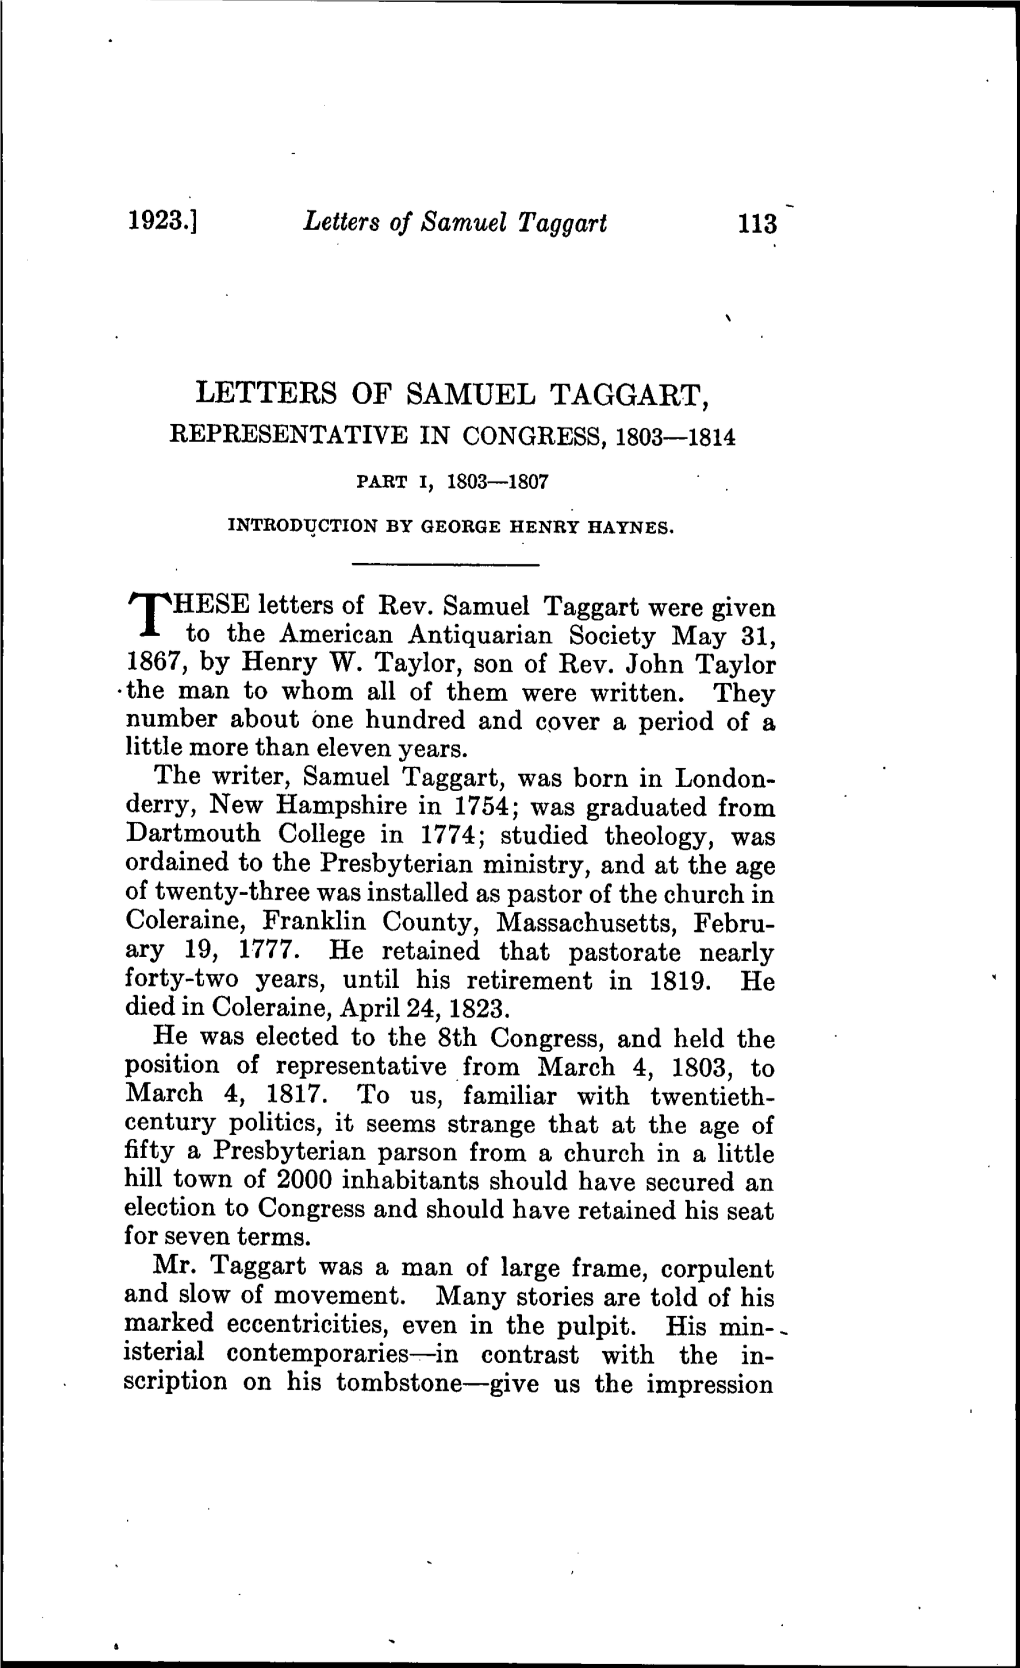 Letters of Samuel Taggart, Representative in Congress, 1803—1814